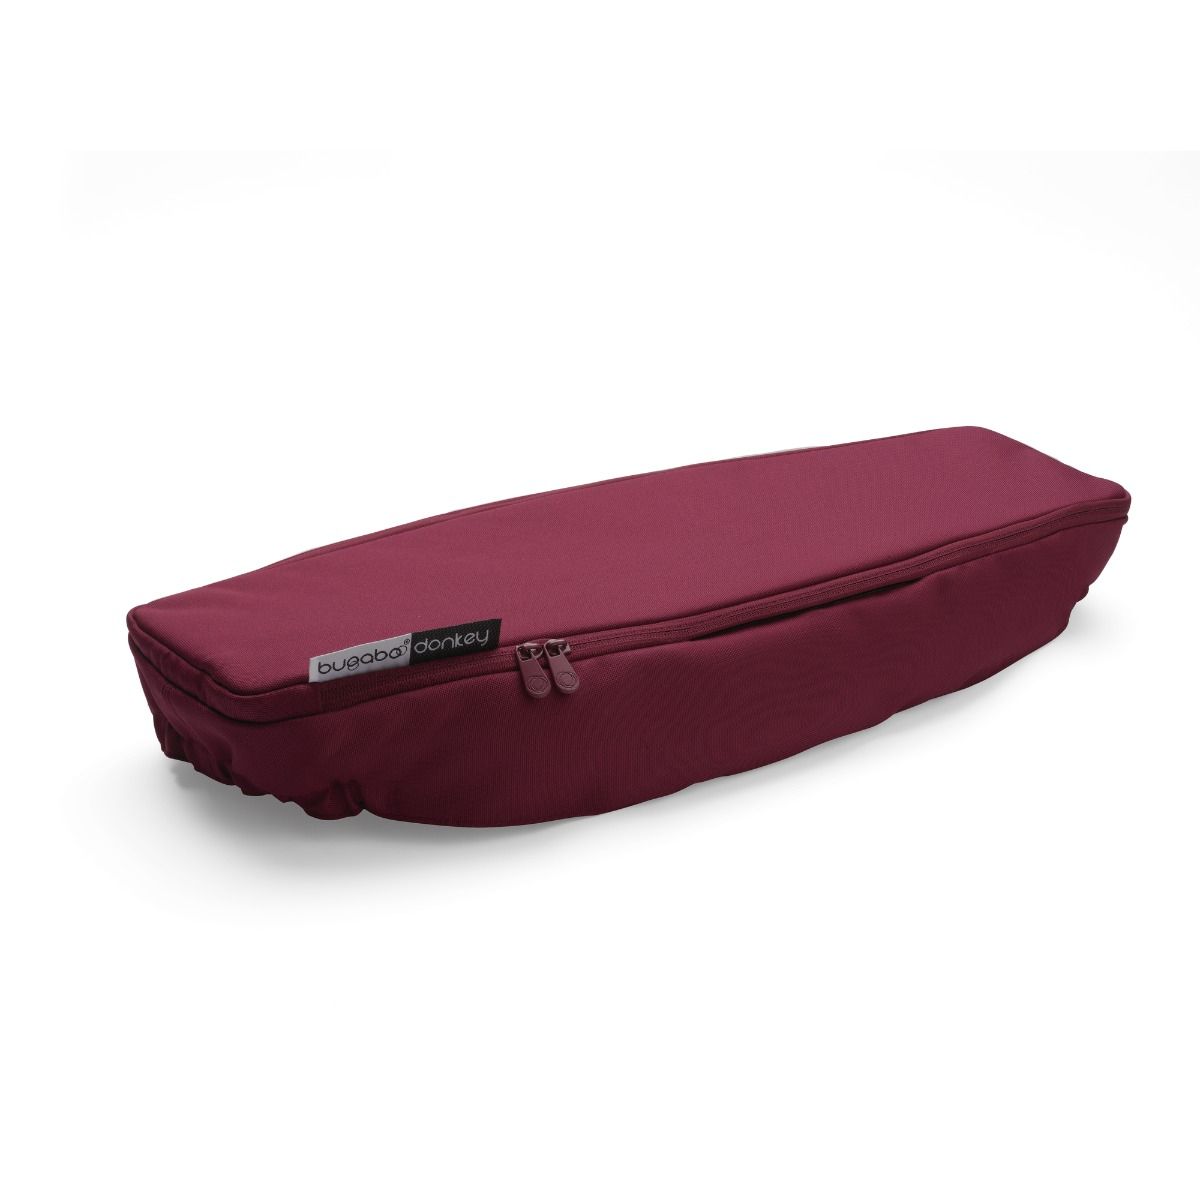 Bugaboo 180119RR01 Donkey 2 Side Luggage Basket Cover - Ruby Red *EX-Display Model*